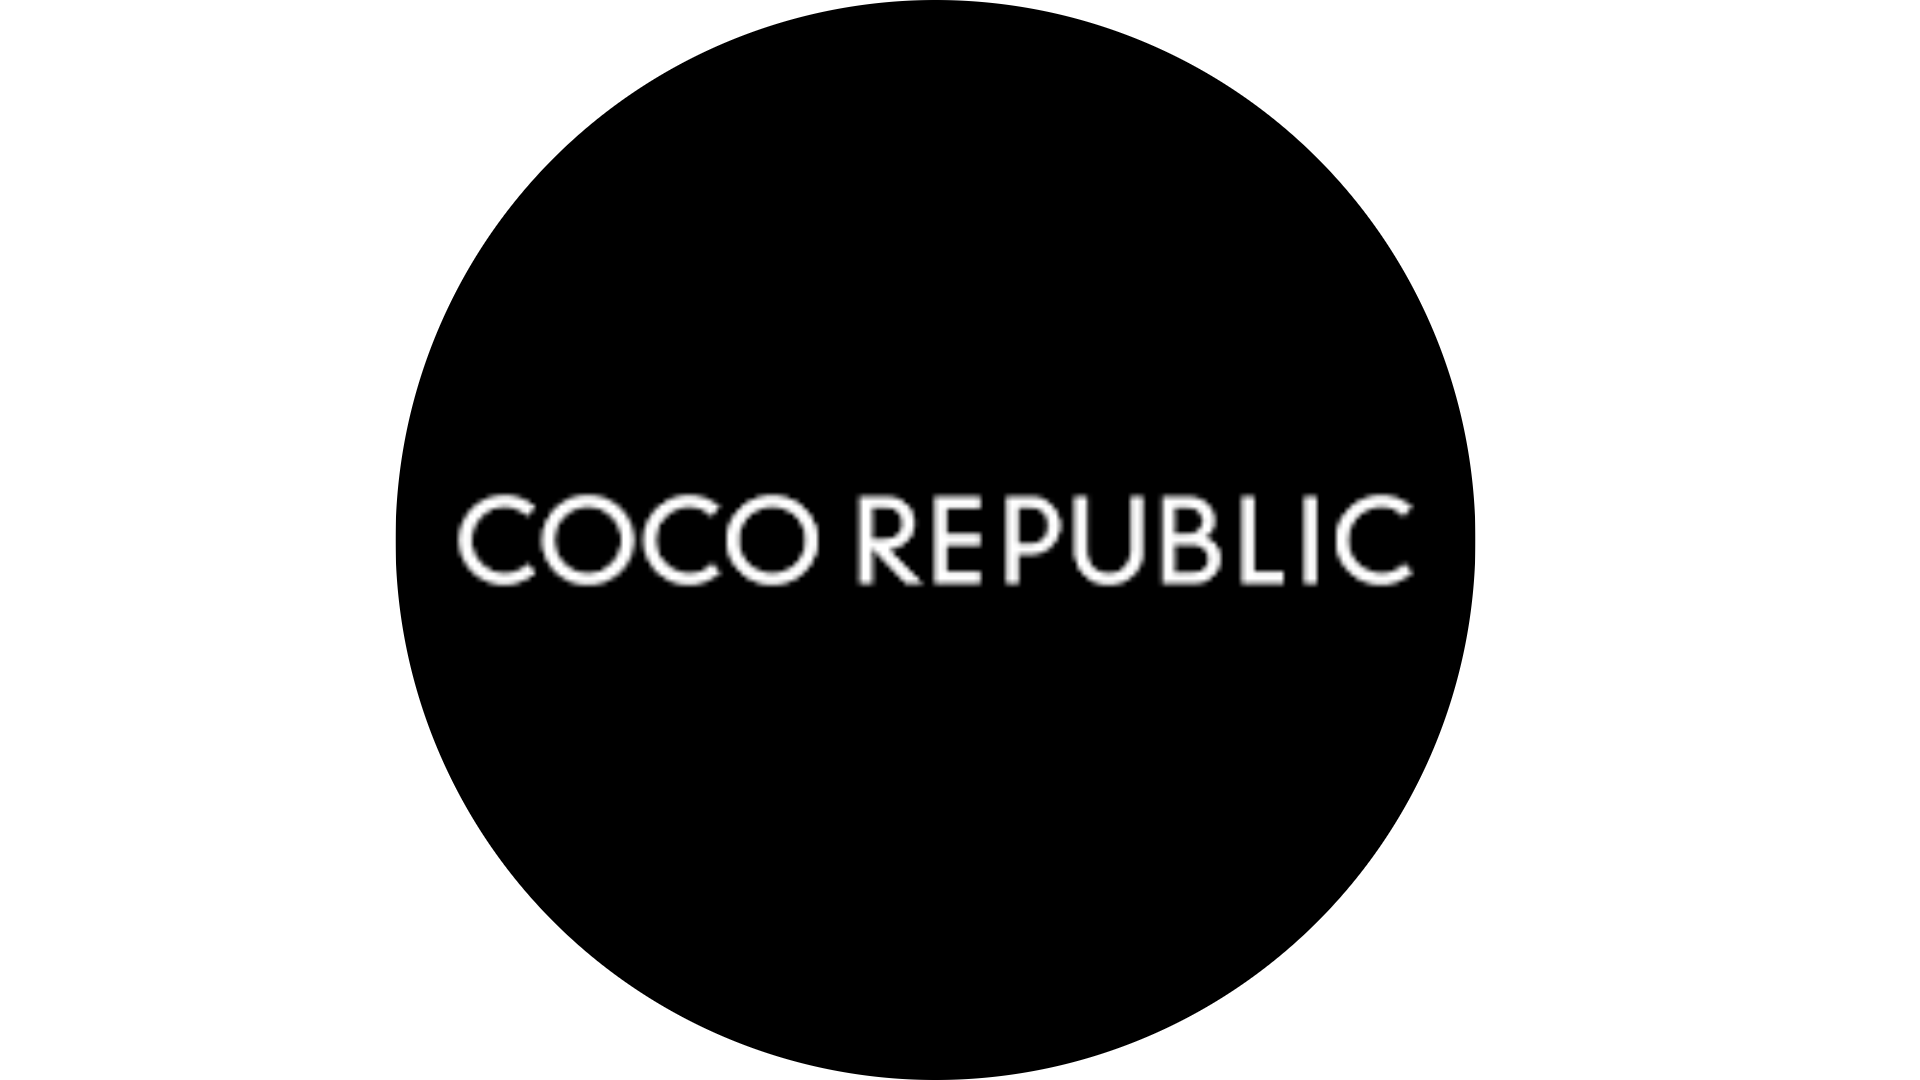 Get the Luxe Noir style with Coco Republic